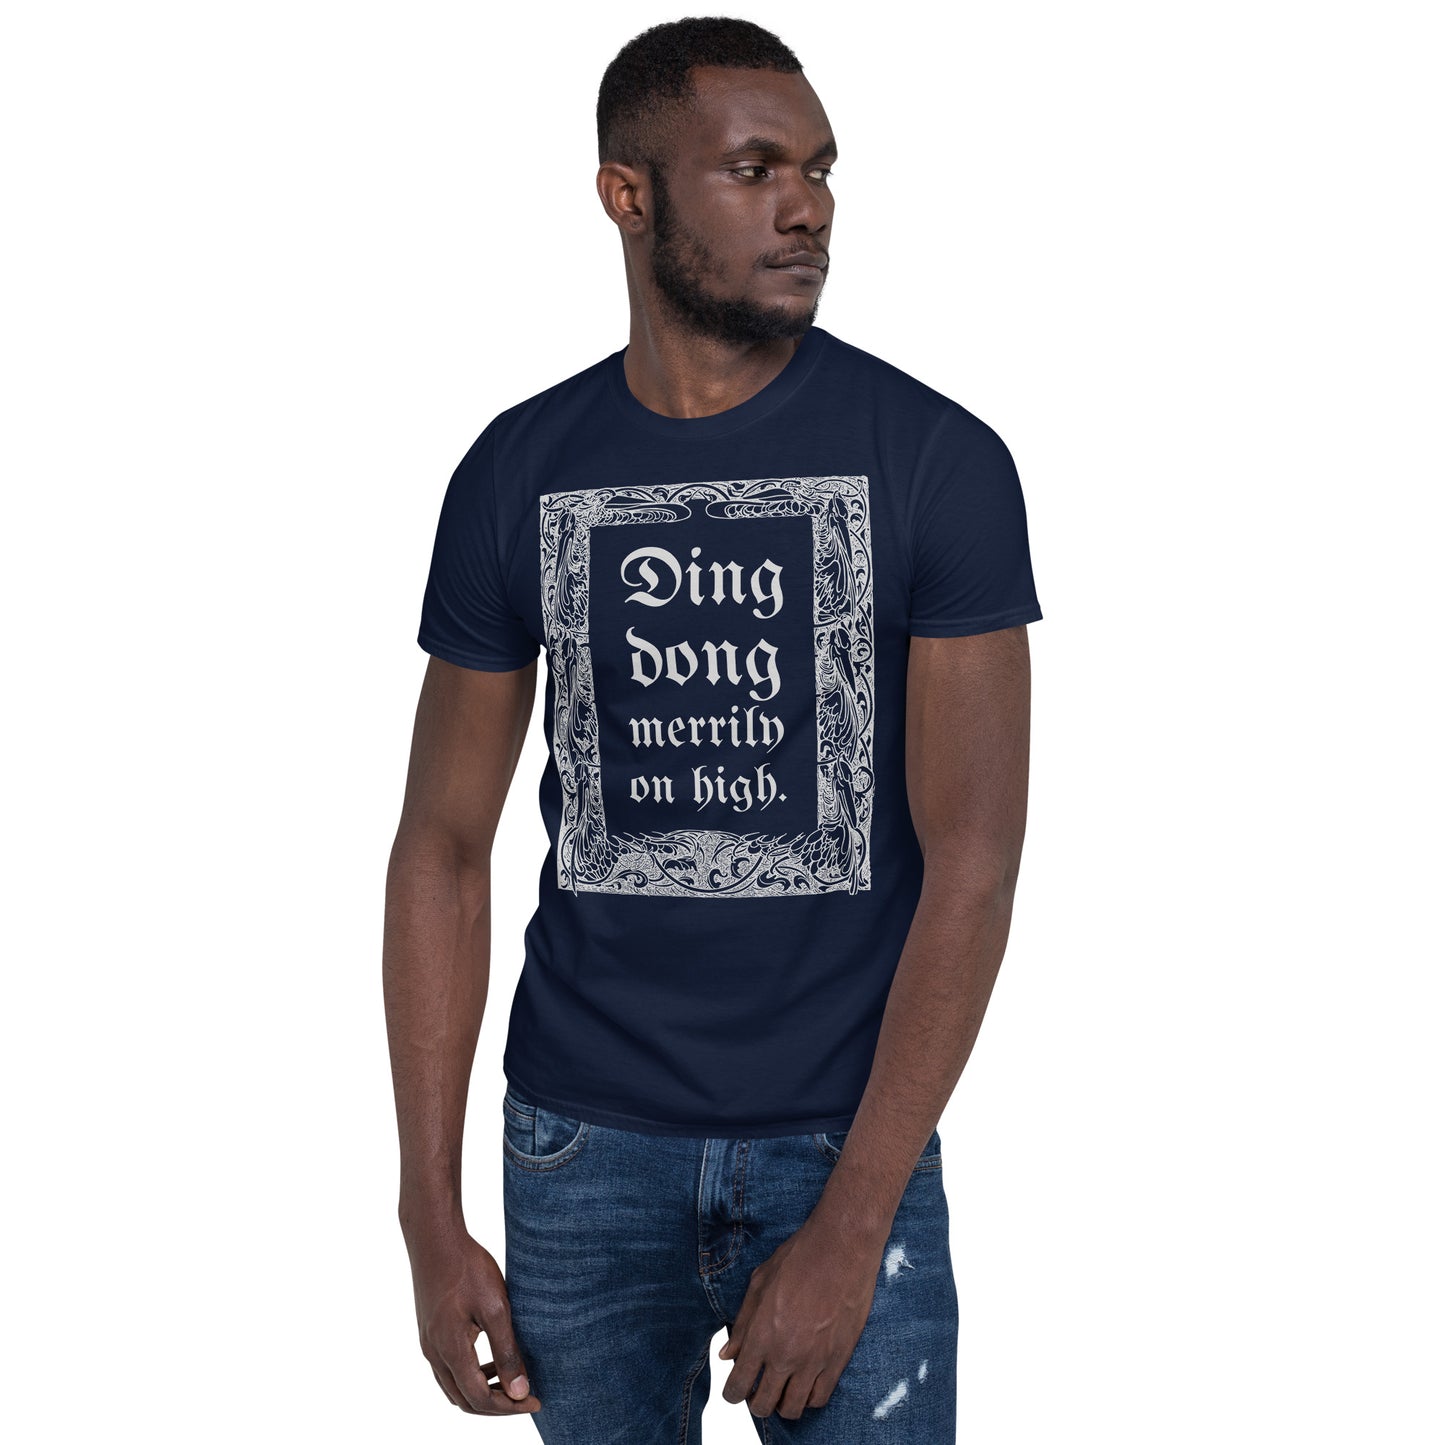 Ding Dong Merrily on High Short-Sleeve Unisex T-Shirt, Ding Dong t-Shirt, Christmas Carol, Old Film Quote